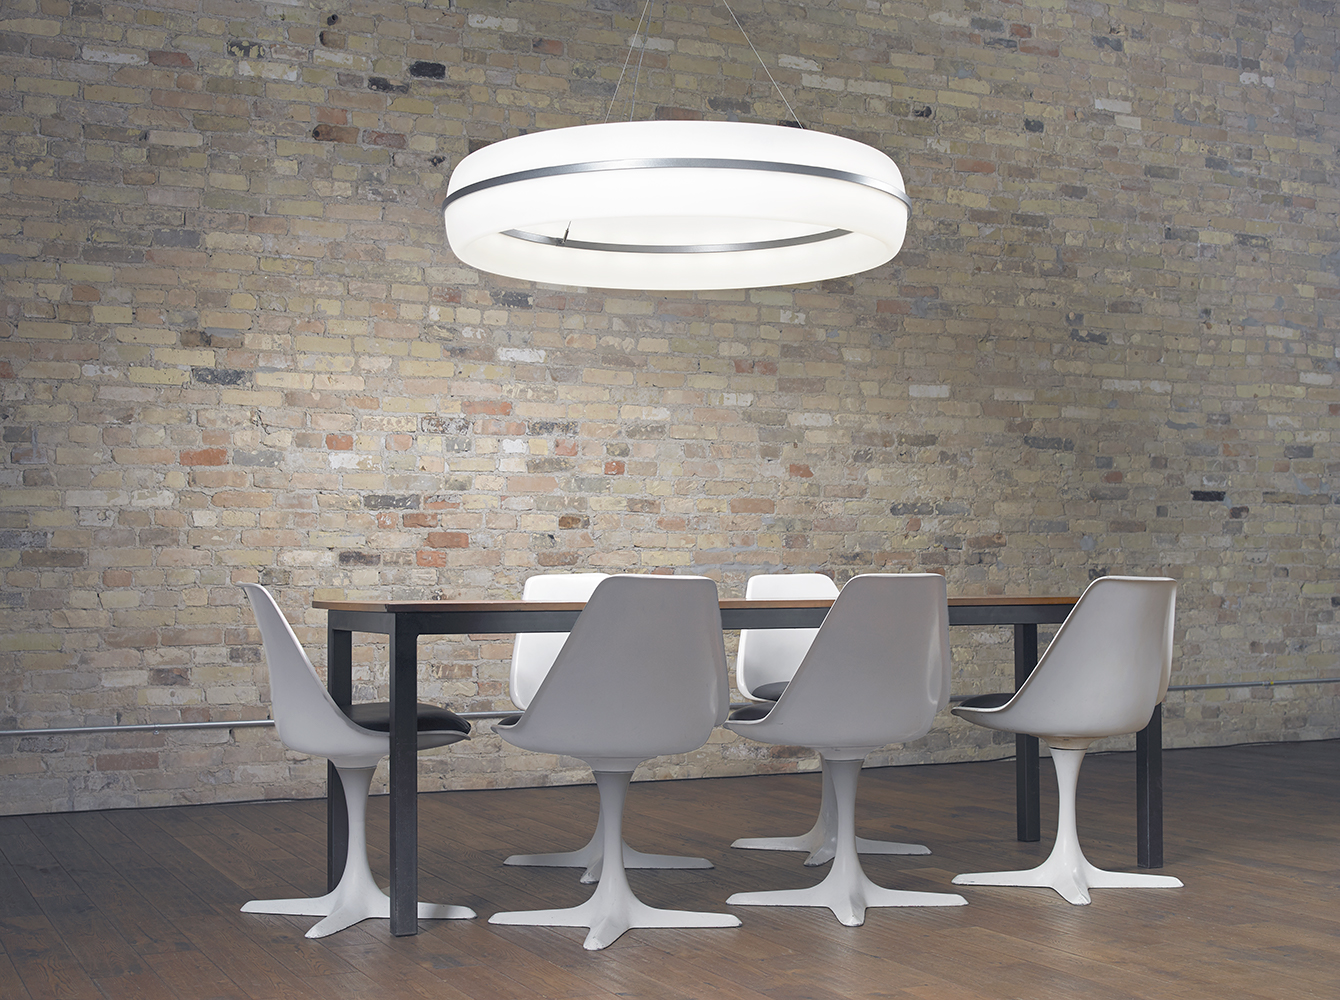 Meridian Round pendant is perfect for office lighting, seen here above a sleek conference table near a brick wall.